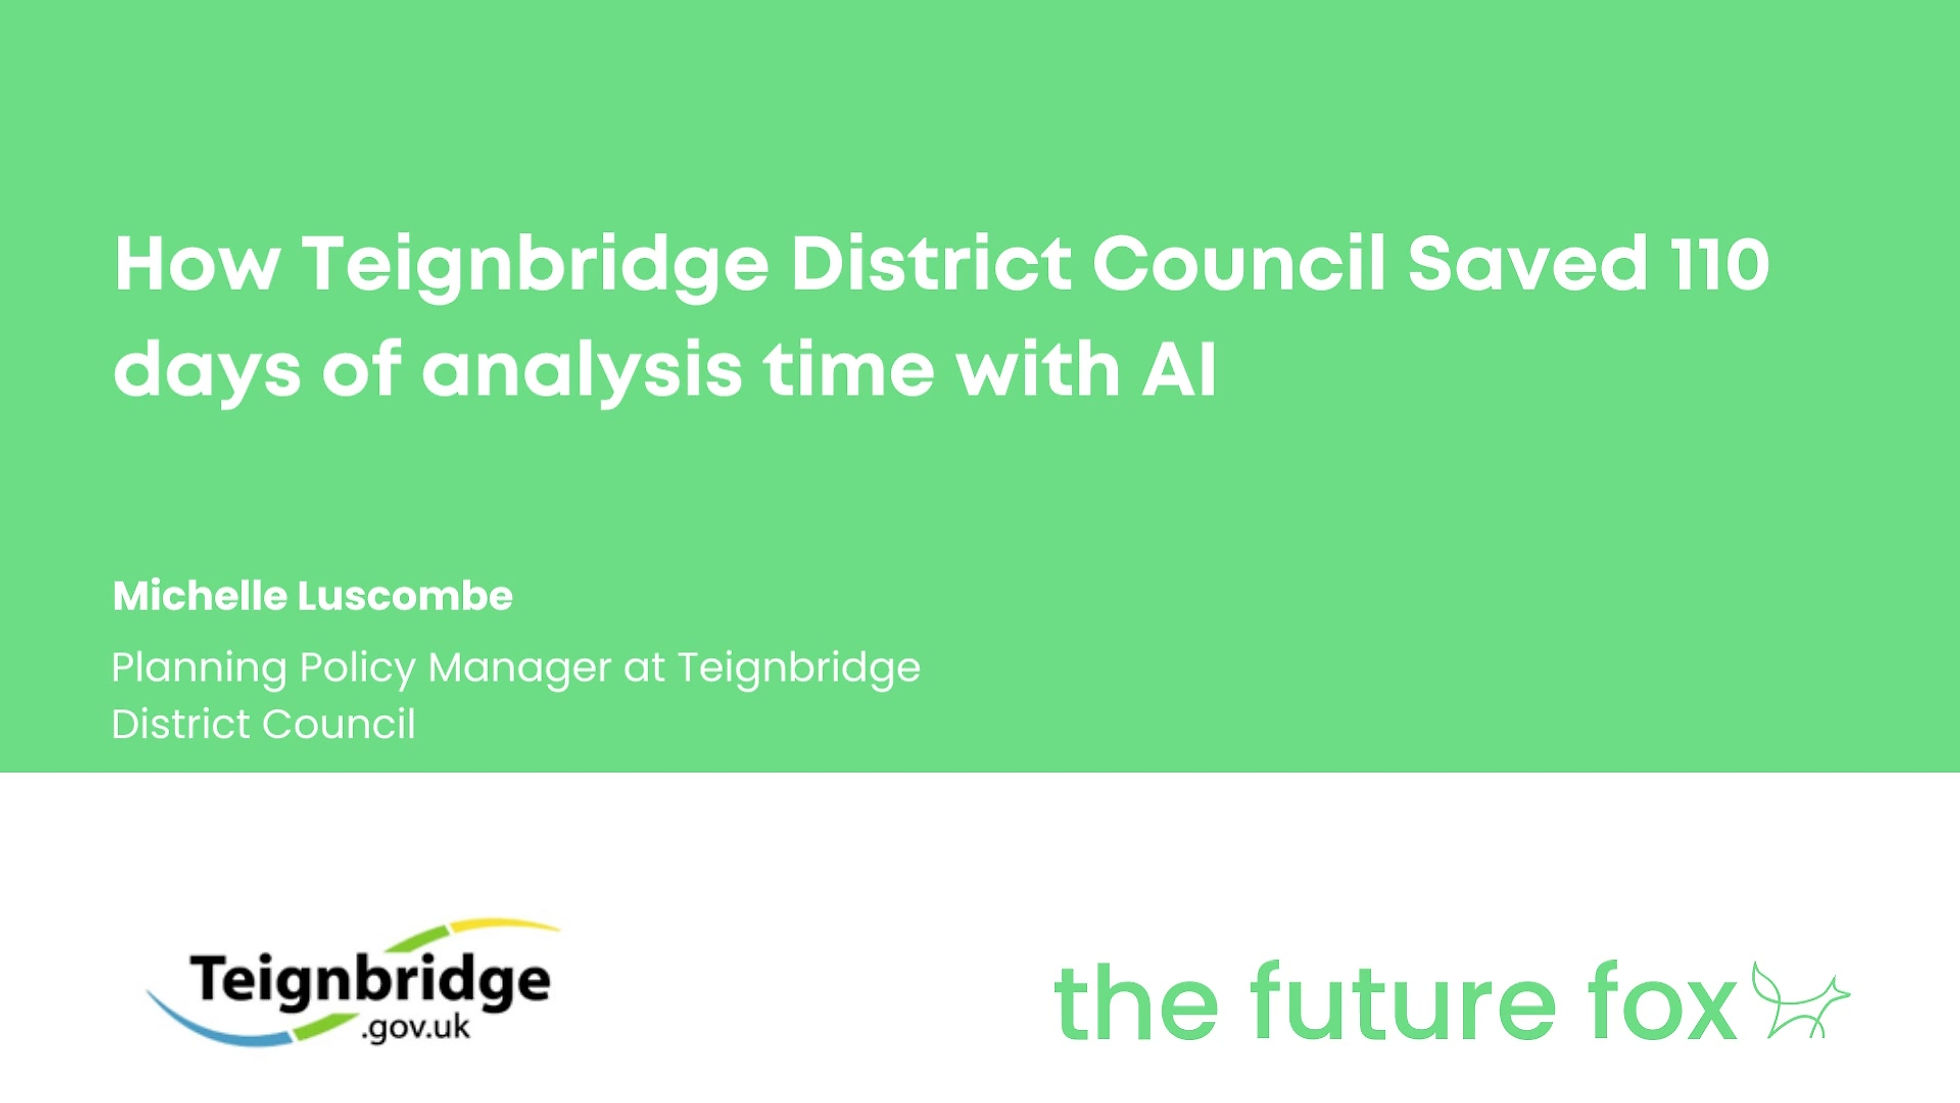 How planners are saving time with AI - Summary of benefits